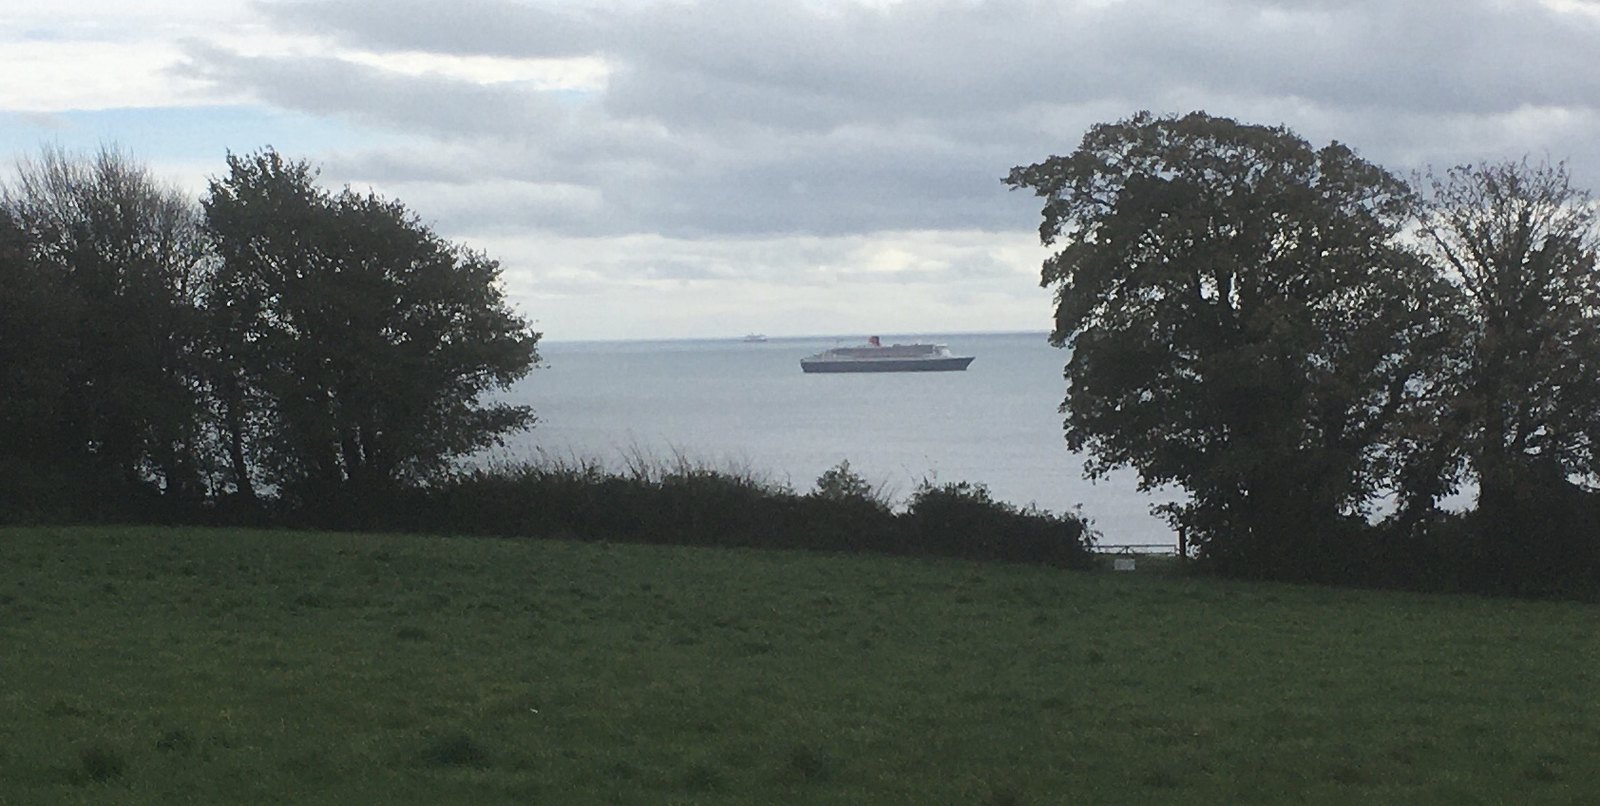 Queen Mary 2 in Babbacombe Bay